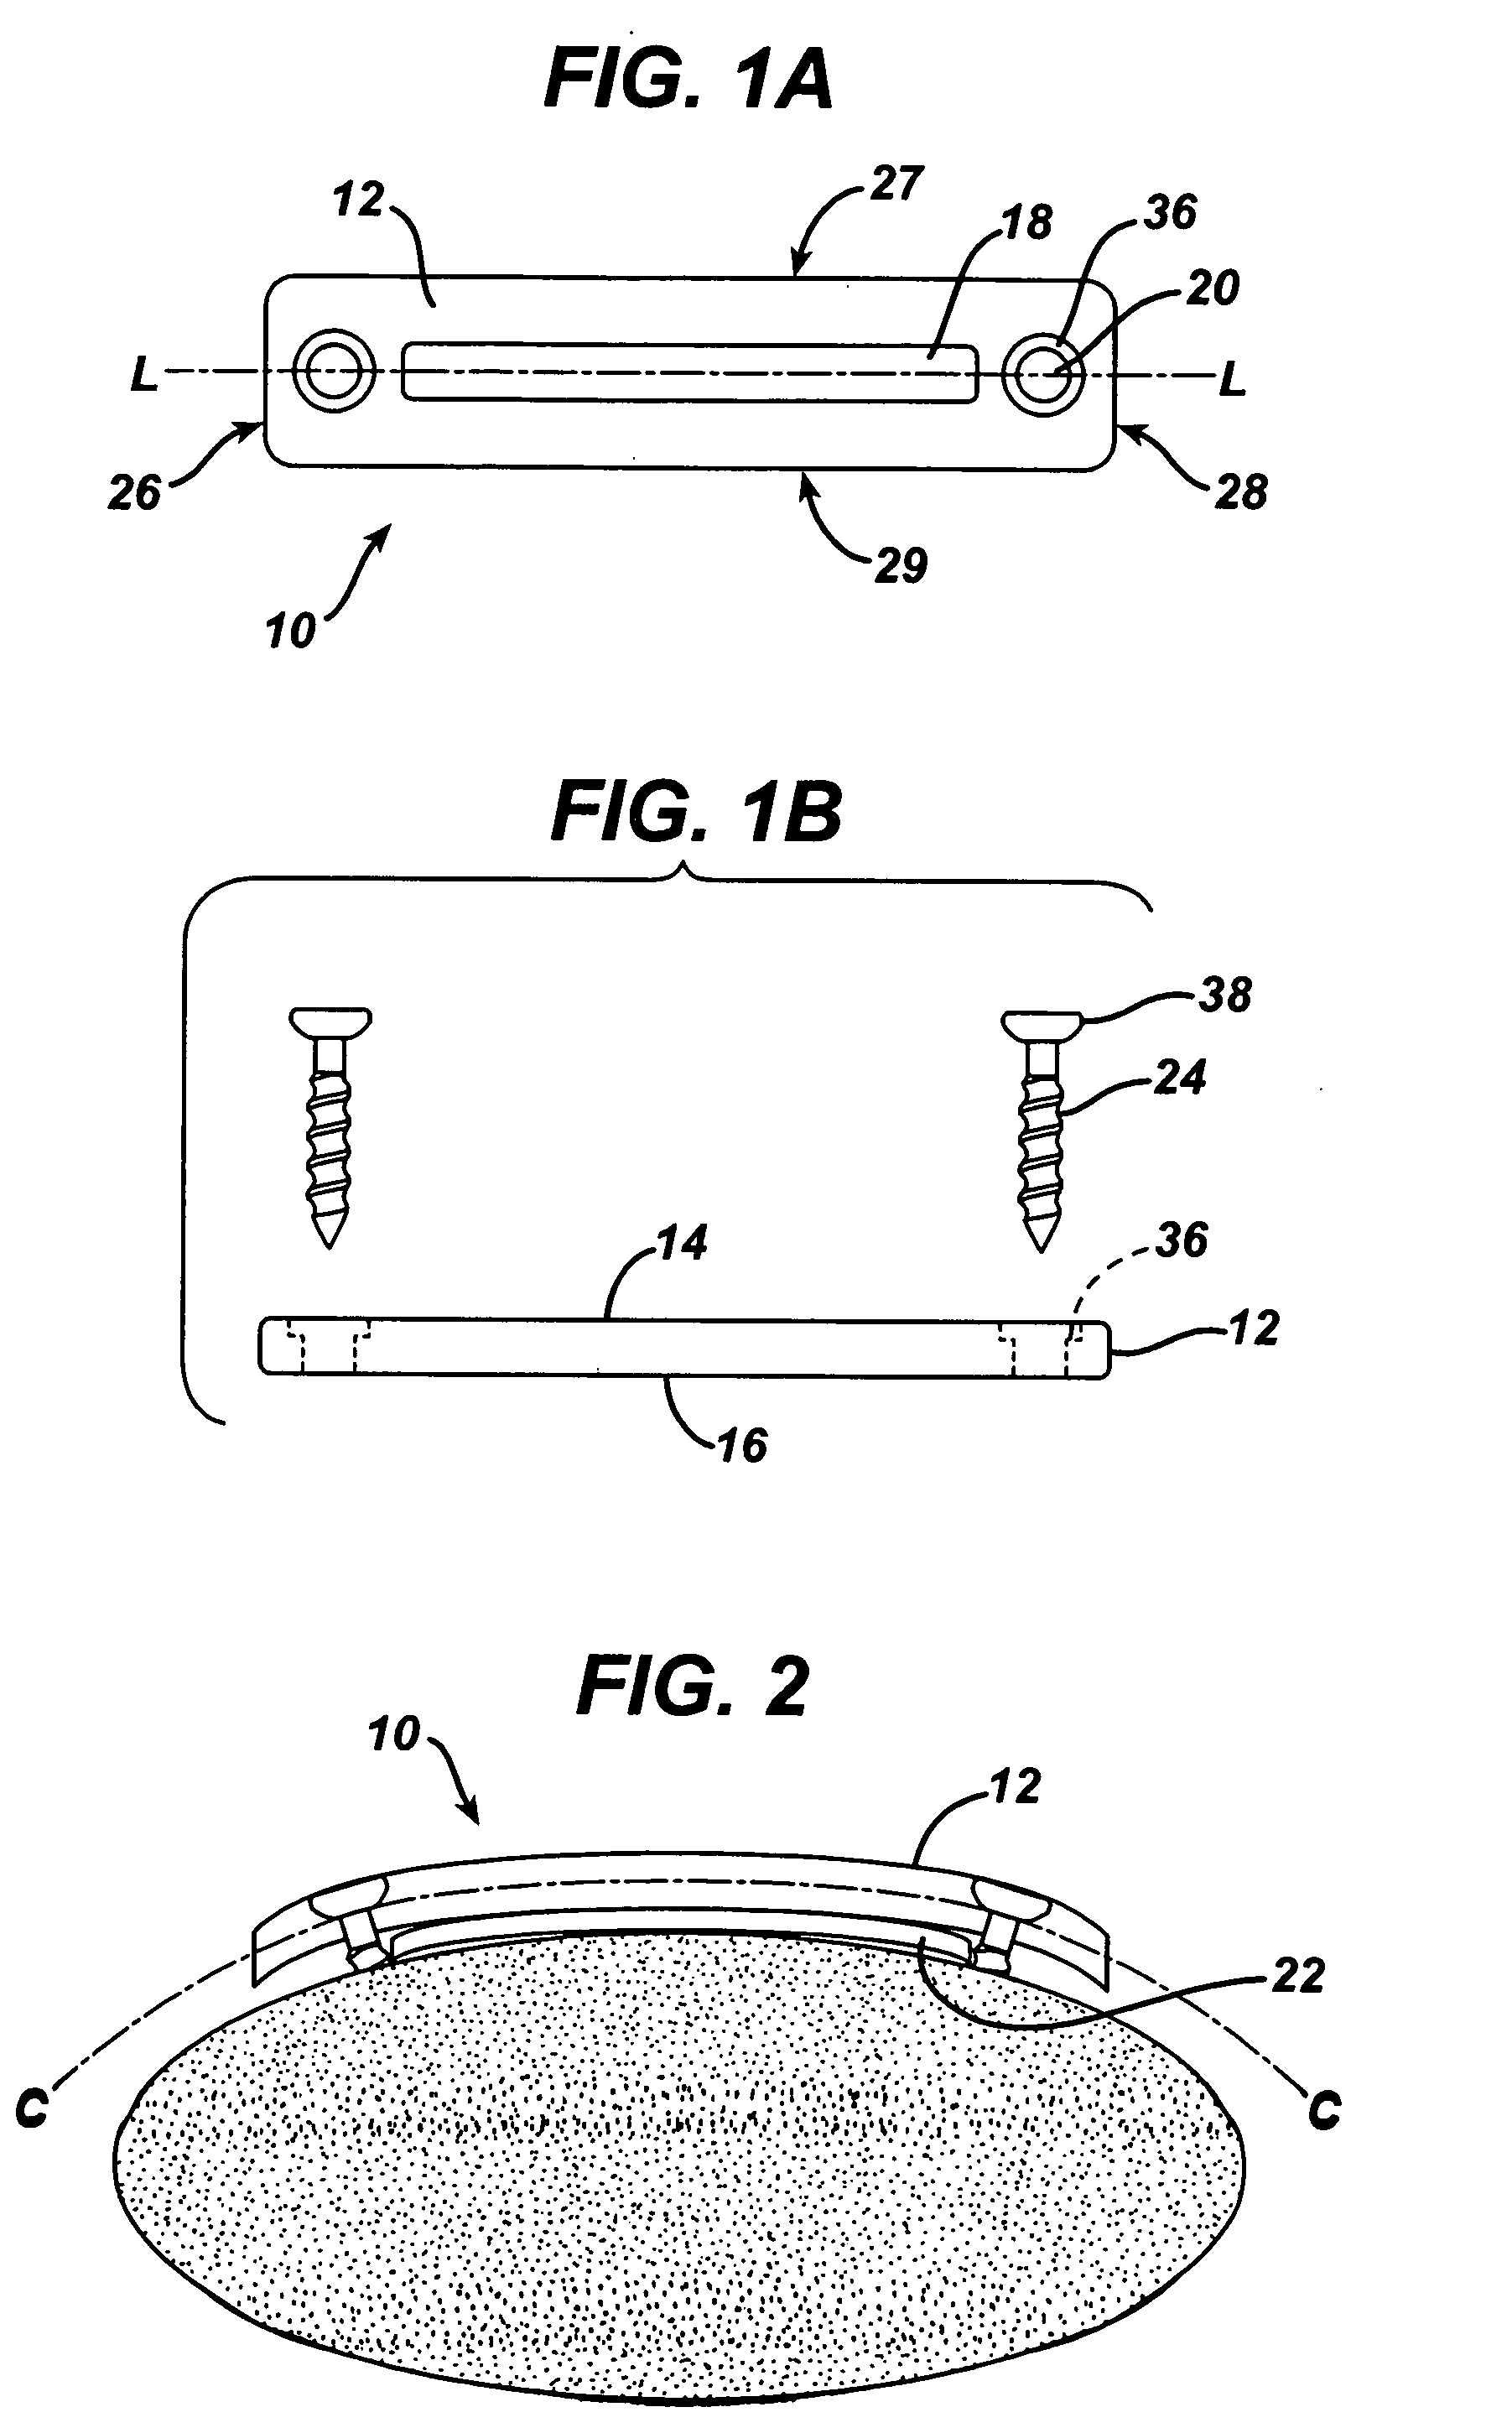 Implant fixation methods and apparatus